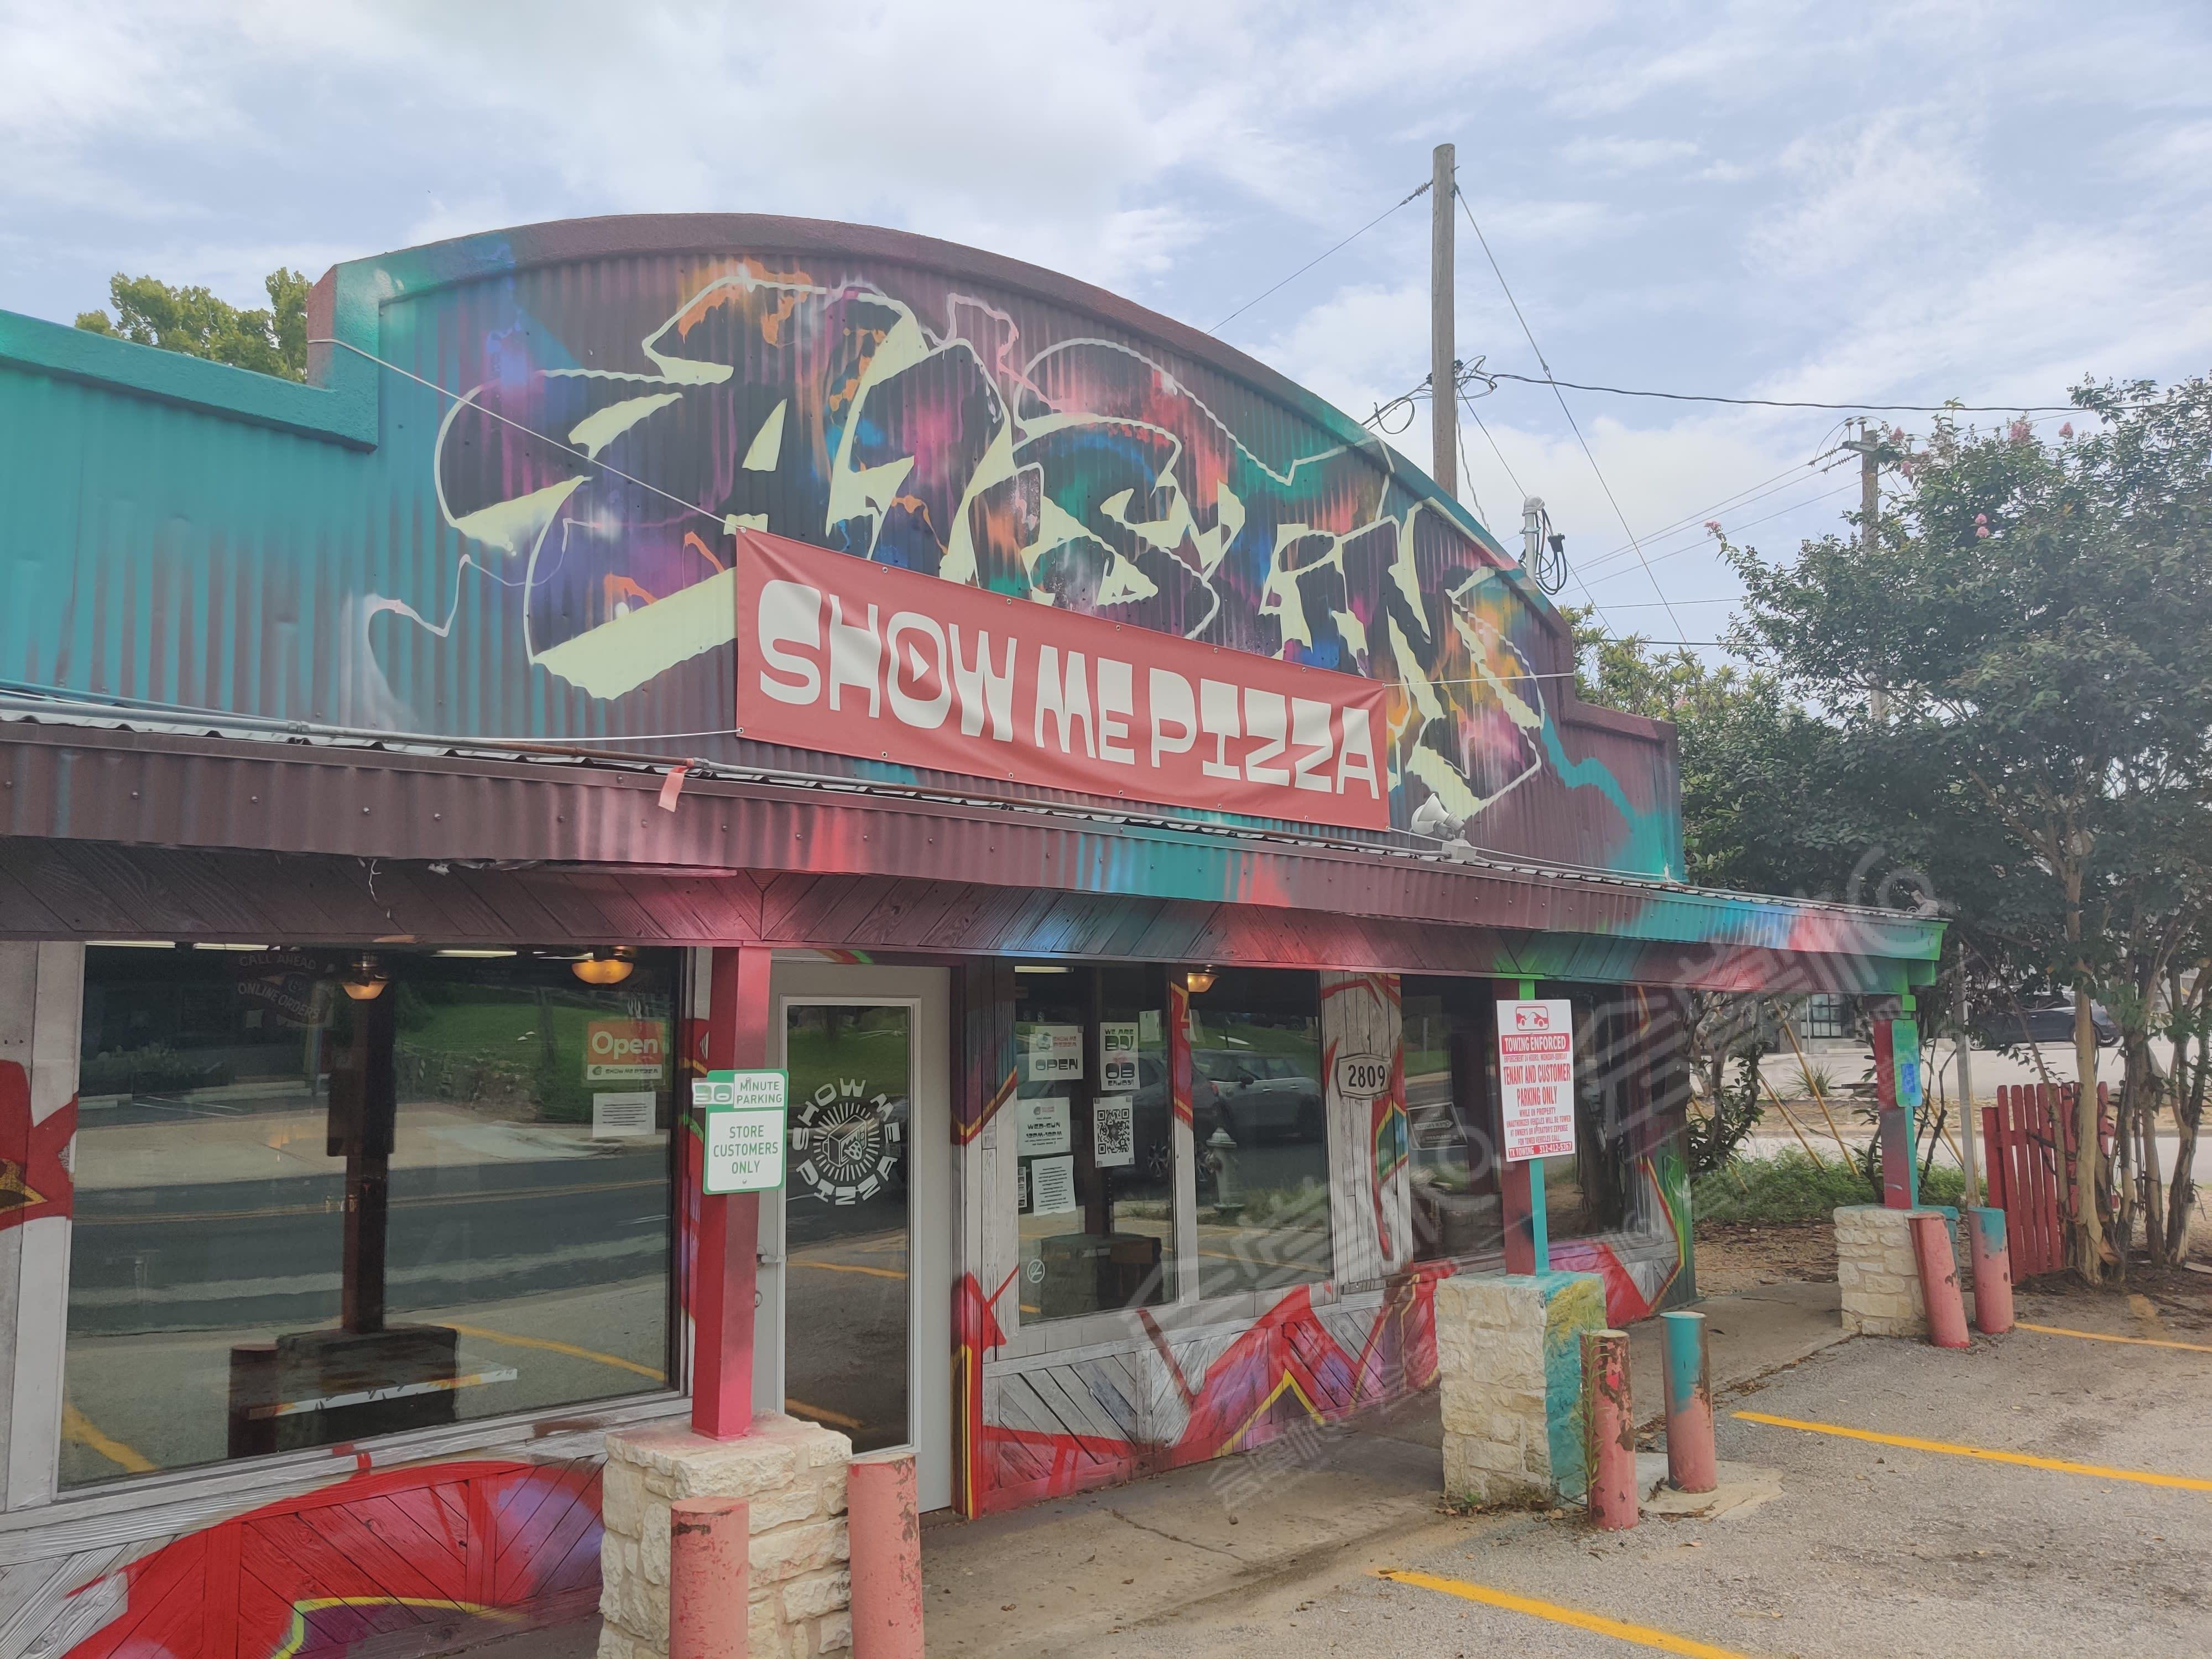 Local South Austin Pizzeria with Funky Vibe